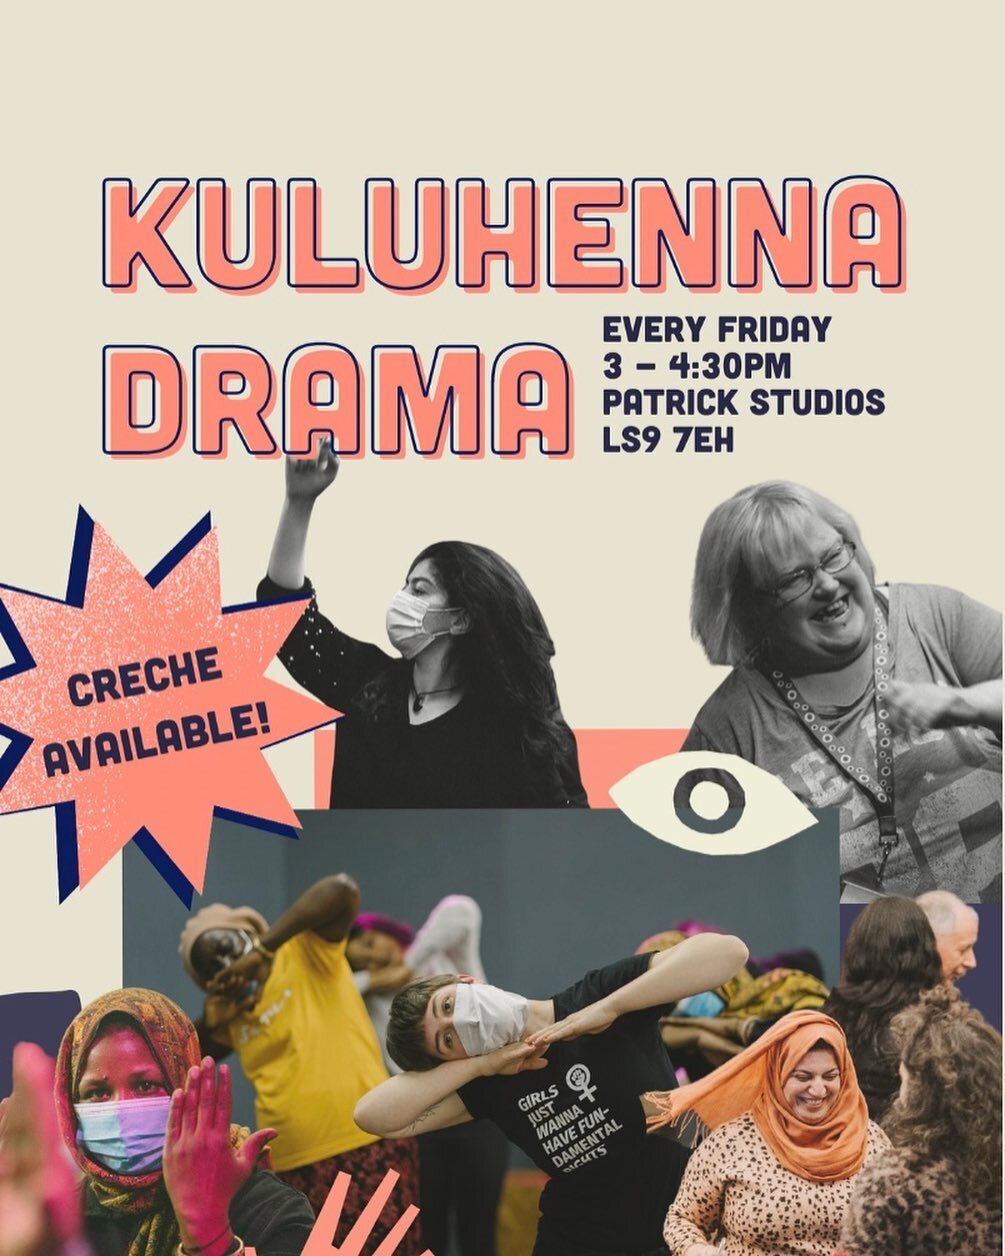 Kuluhenna Drama workshops restart next week on Friday 30th!

These weekly creative workshops for women take place from 3:00 - 4:30pm at Patrick Studios, LS9 7EH. 

Workshops are free to join and a cr&egrave;che is available. You can join using the si